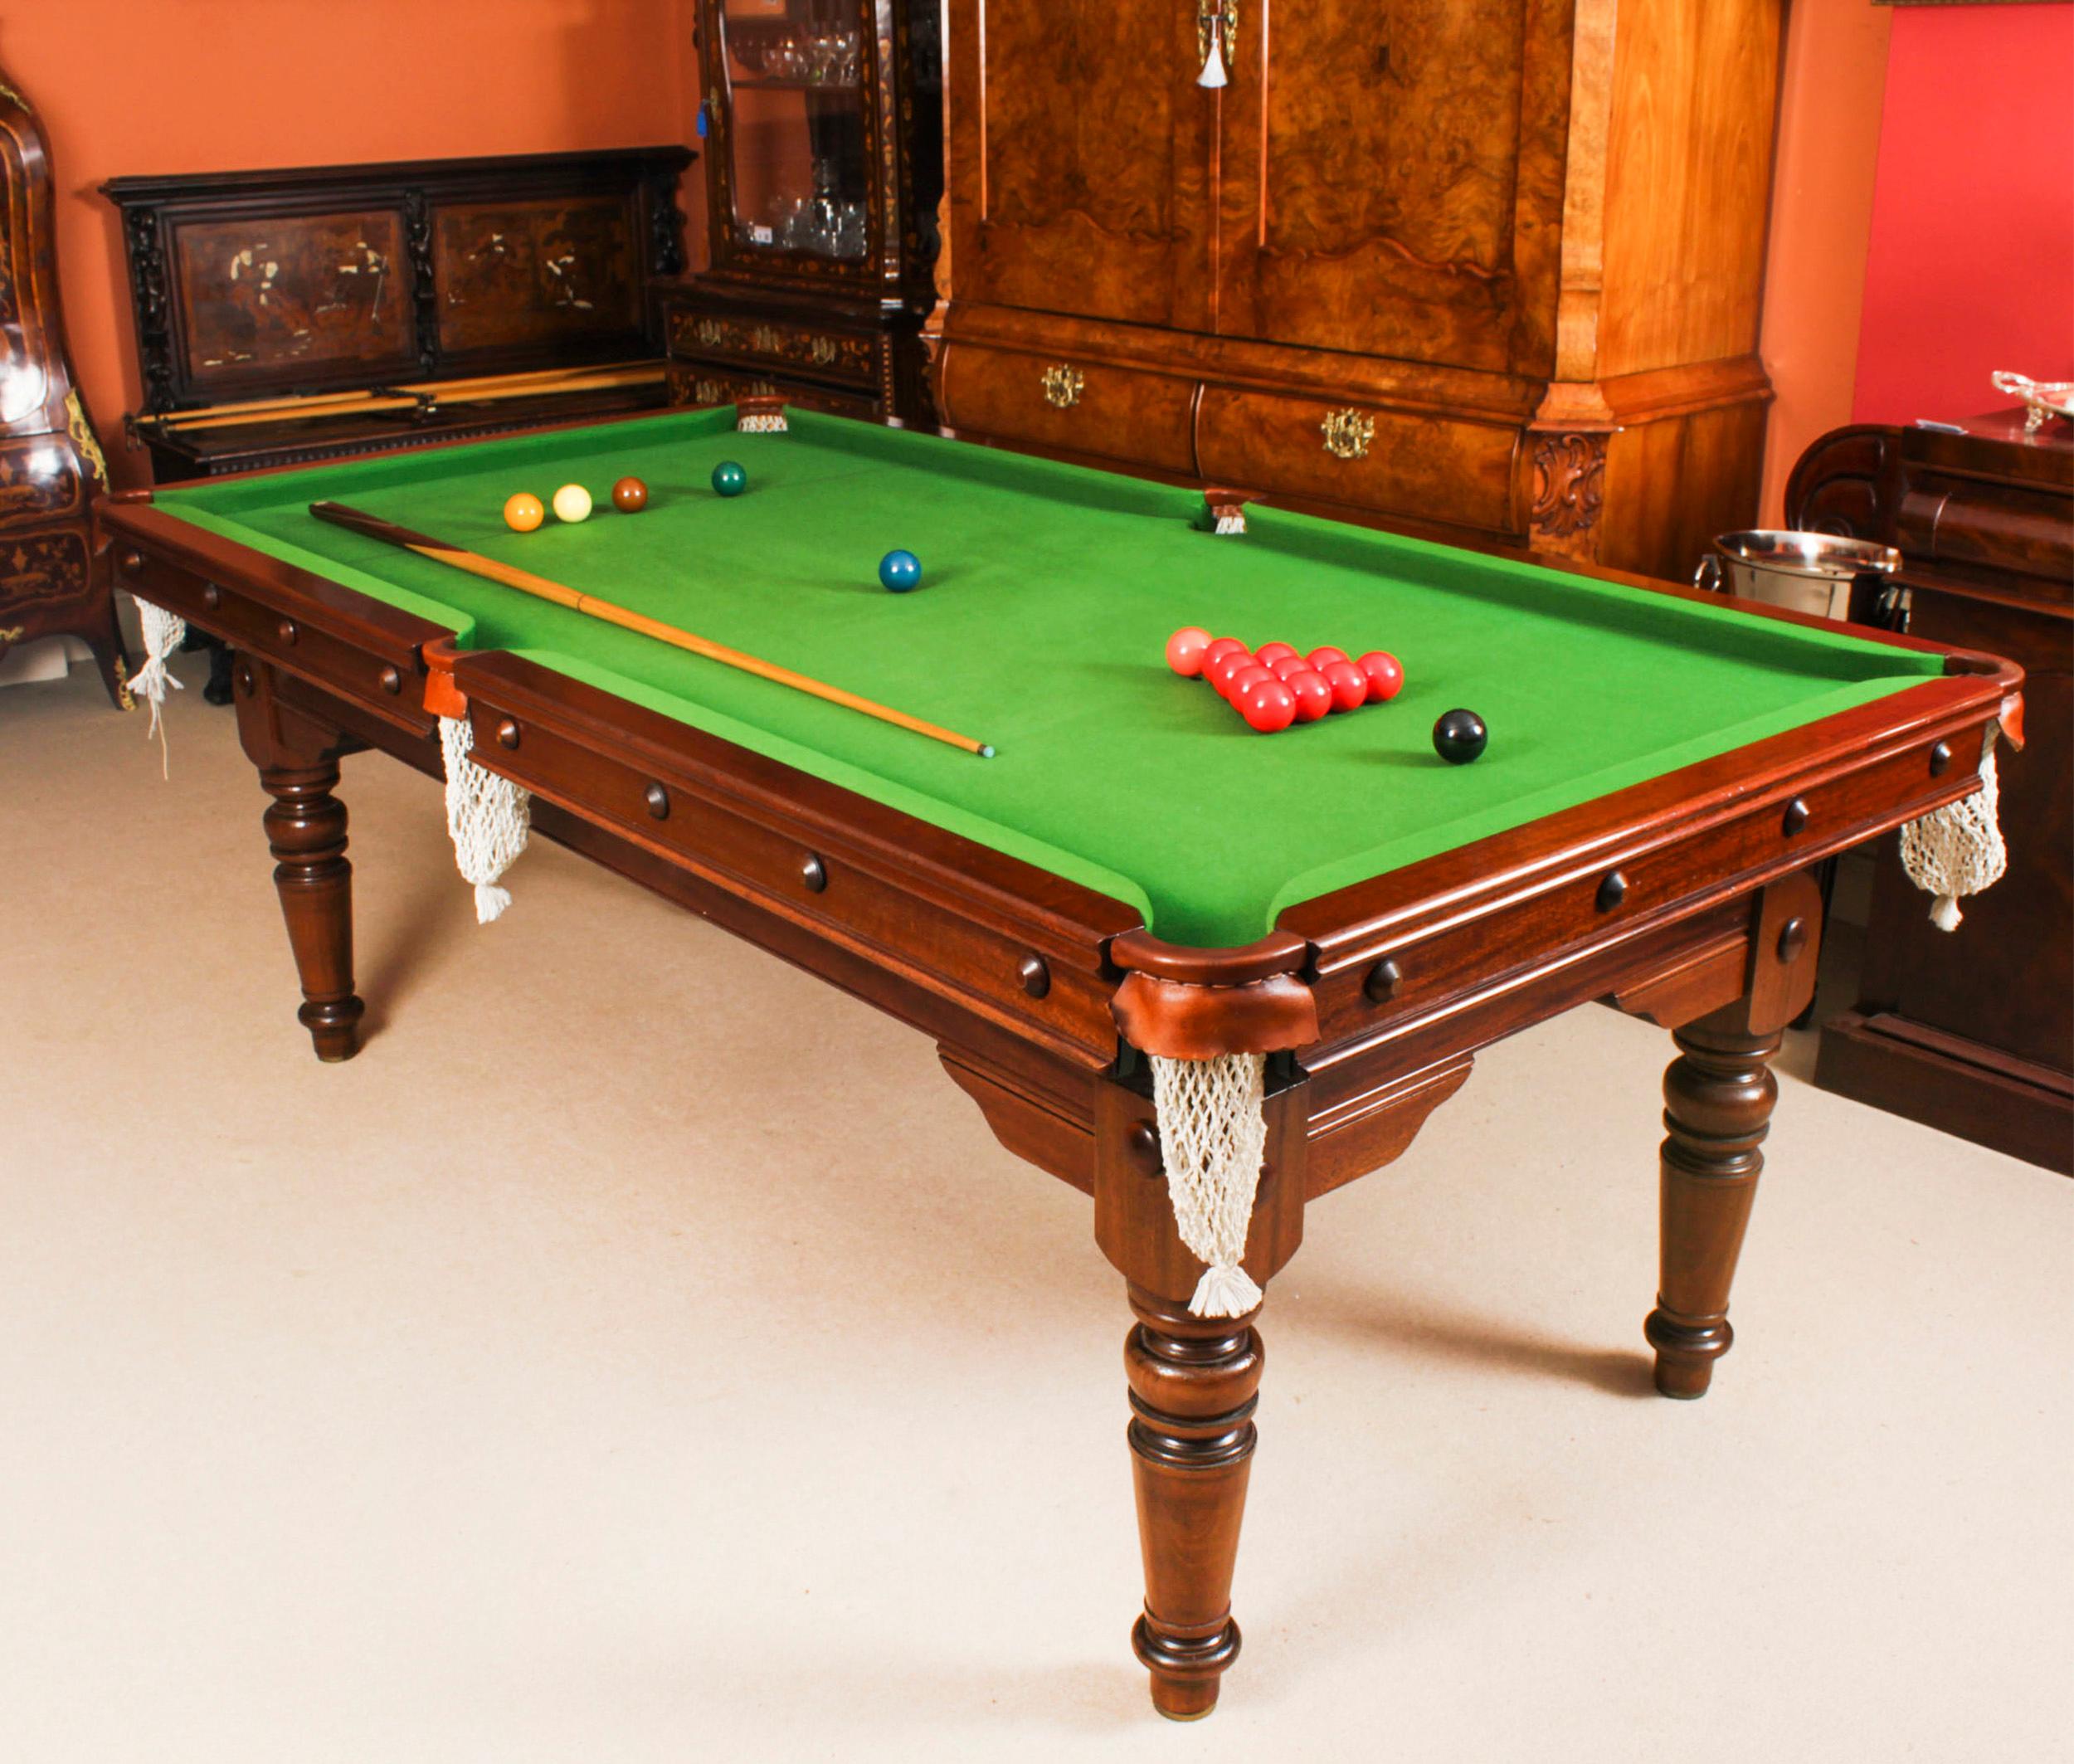 A superb antique Edwardian metamorphic  snooker billiards table /dining table by E.J.Riley Circa 1900 in date restored by the renowned billiards table makers Hamilton & Tucker with a set of eight Regency Revival barback dining chairs.

This table